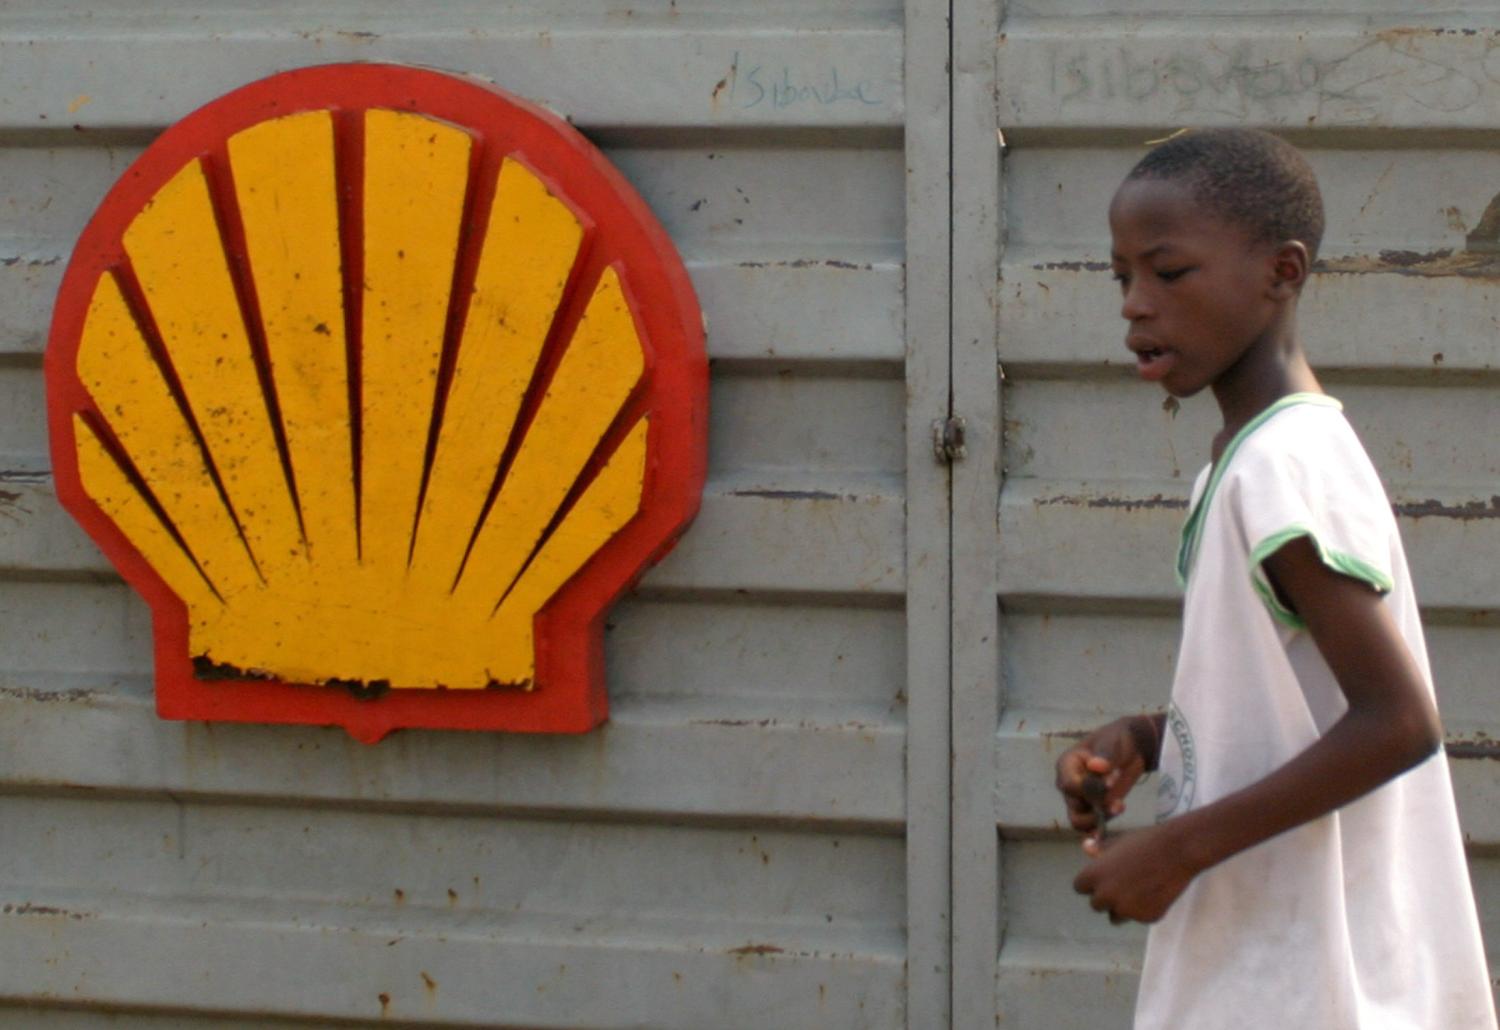 A Nigerian schoolboy walks past the logo of Dutch oil giant Shell near Warri in the volatile Niger-Delta region January 17,2006. World oil prices hit a three and half-month high on Tuesday after militants said they would broaden attacks on Nigeria's oil industry, threatening to cut deeper into supplies from the world's eighth biggest exporter. REUTERS/George Esiri - RP3DSFDKUHAD